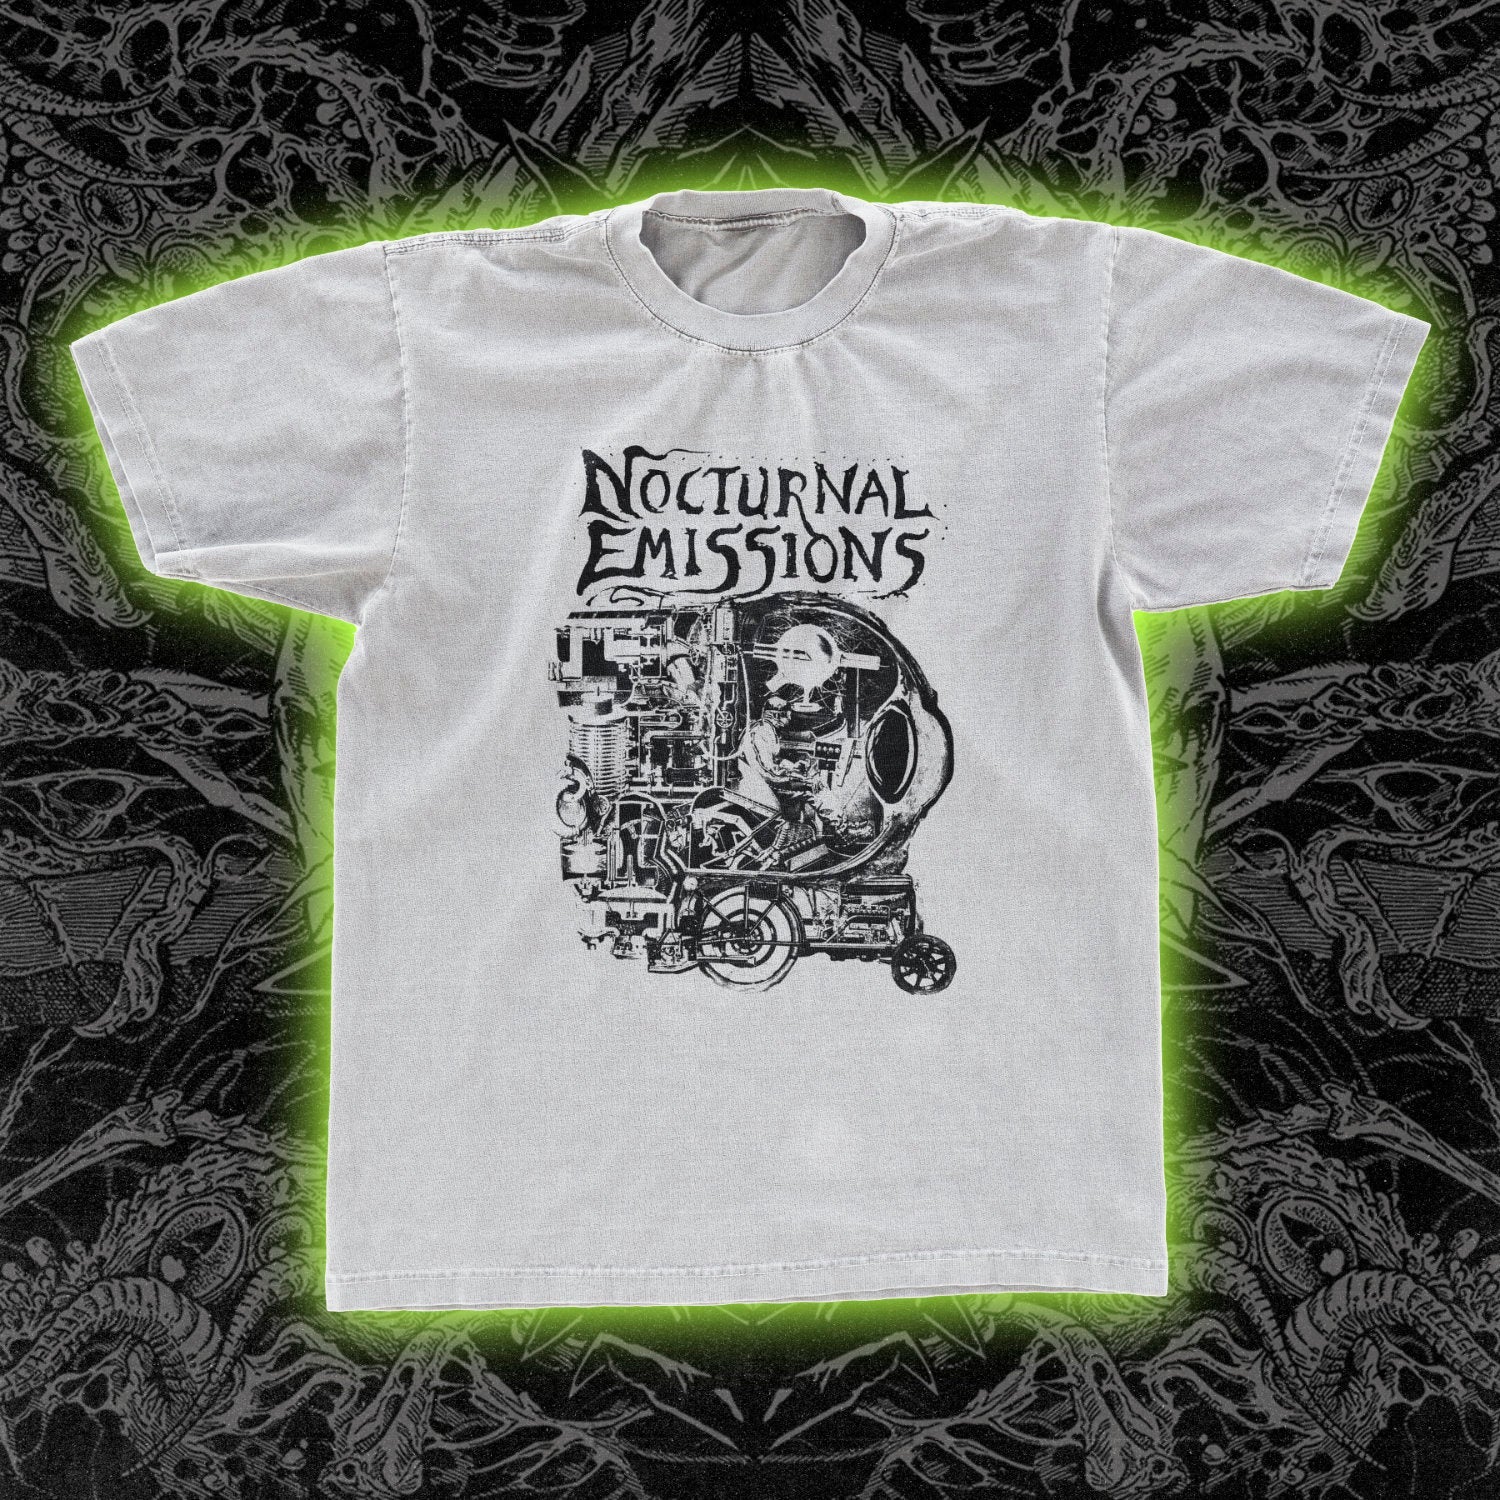 Nocturnal Emissions Classic Tee